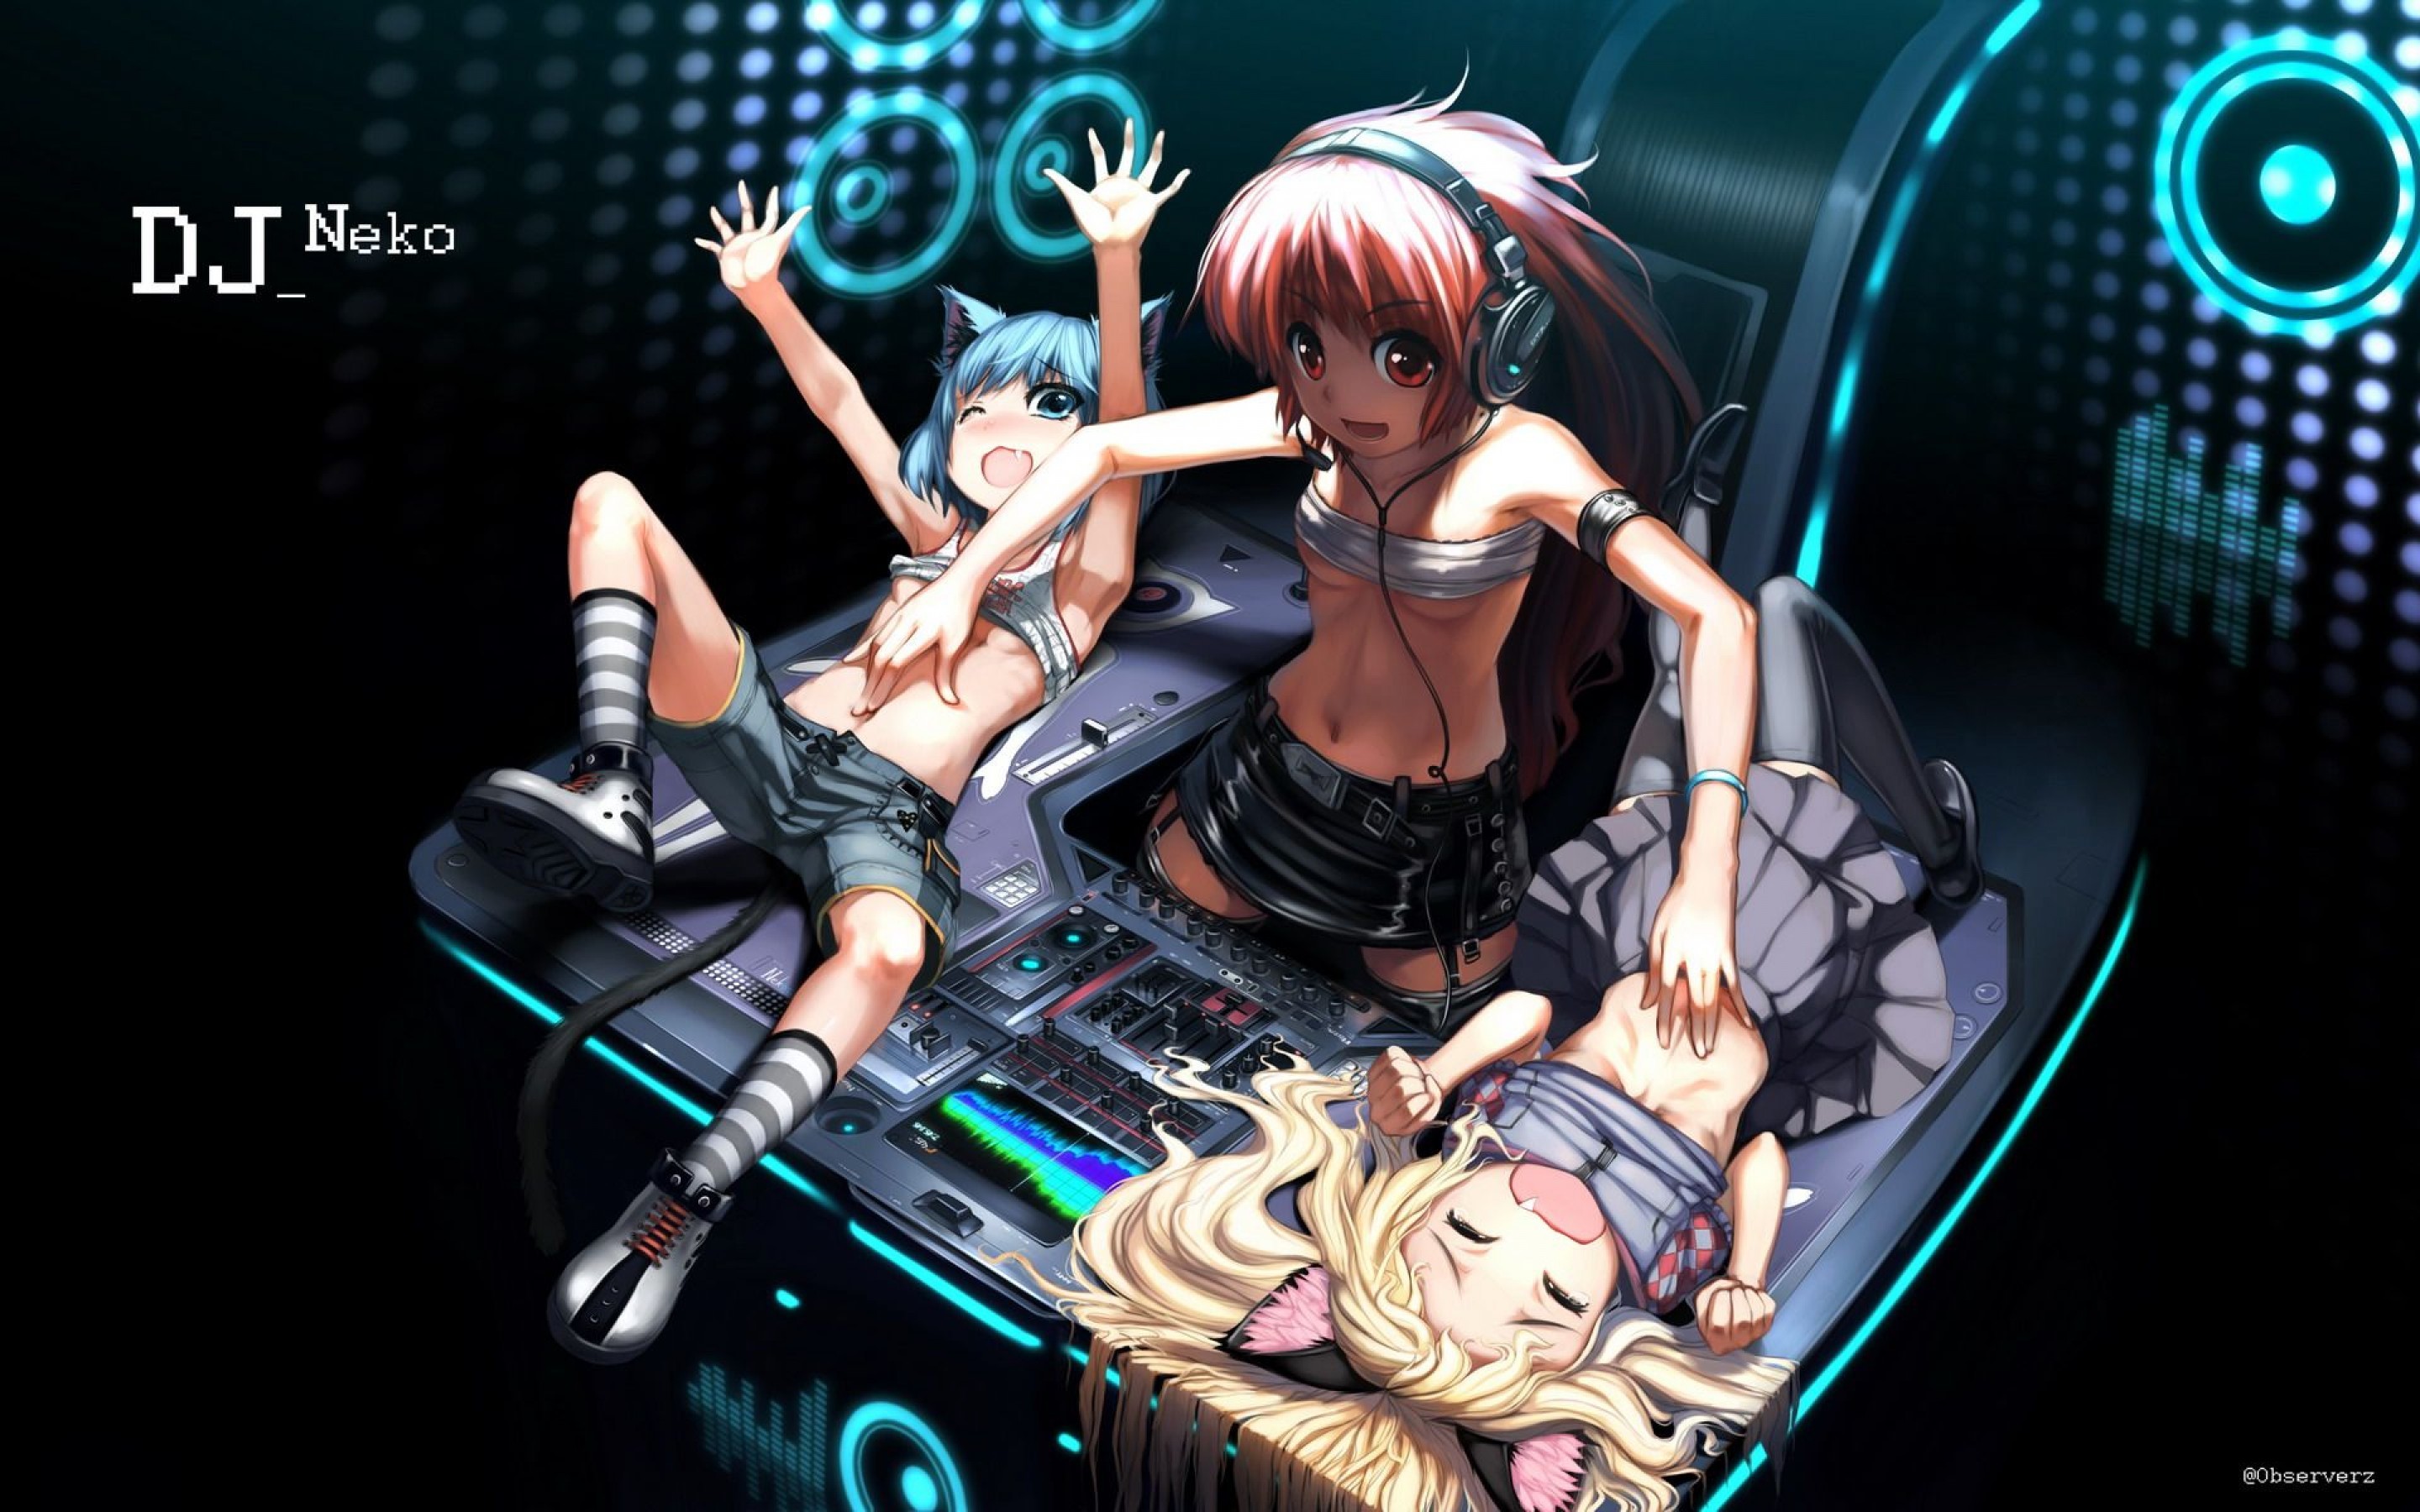 Showing Spin Me Round at resolution , Spin Me Round anime girls wallpaper, cool anime style girls playing on a mixer drawing desktop music wallpapers